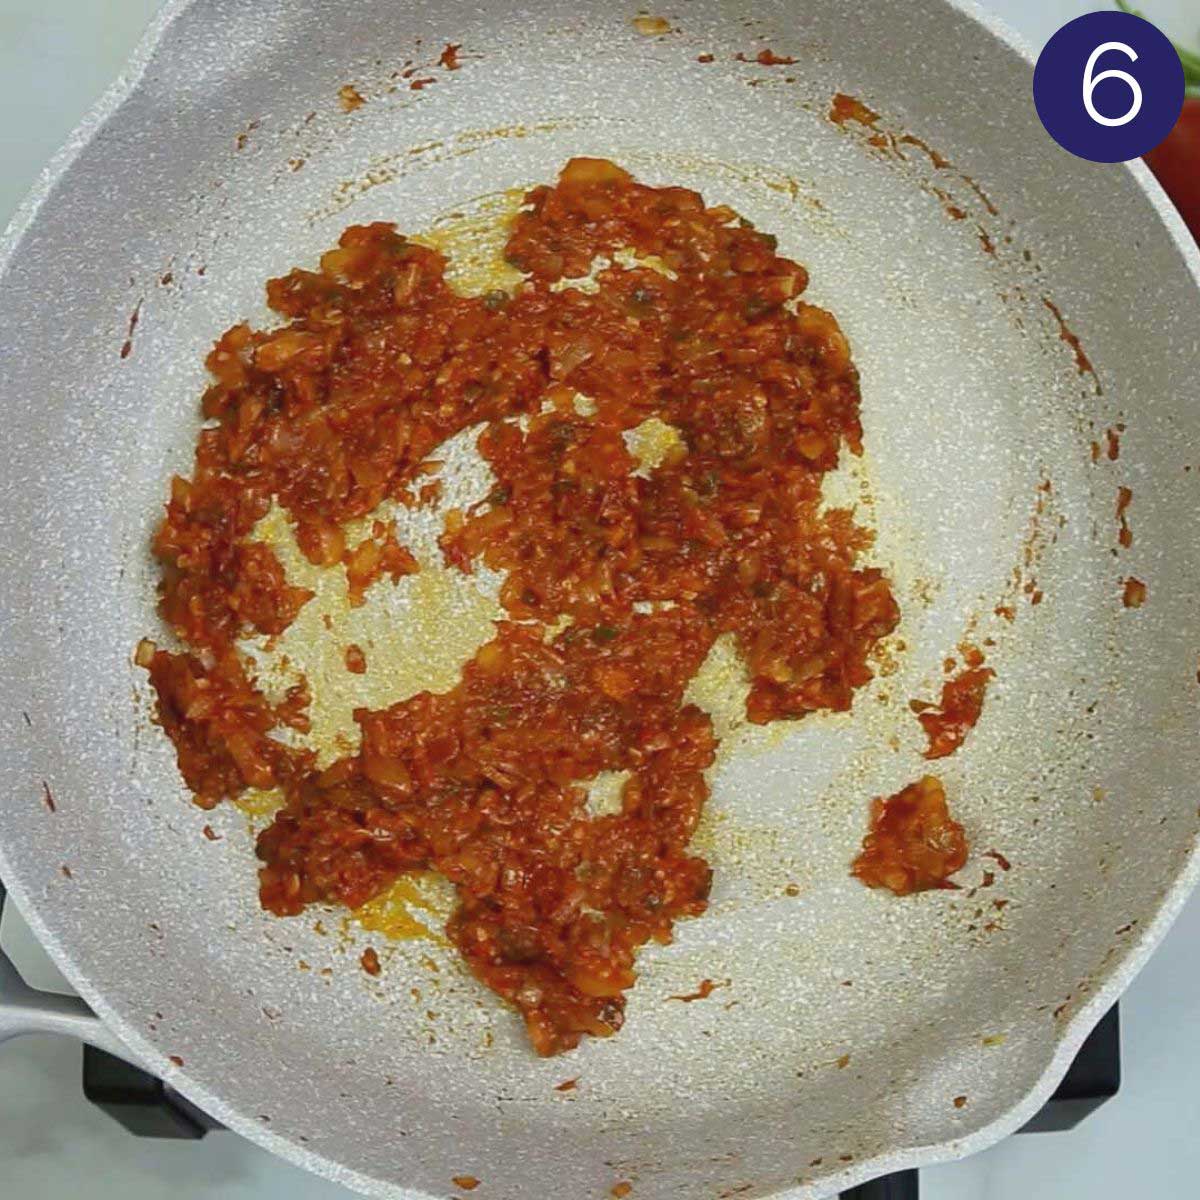 Cooked onion and tomato mixture in a skillet.